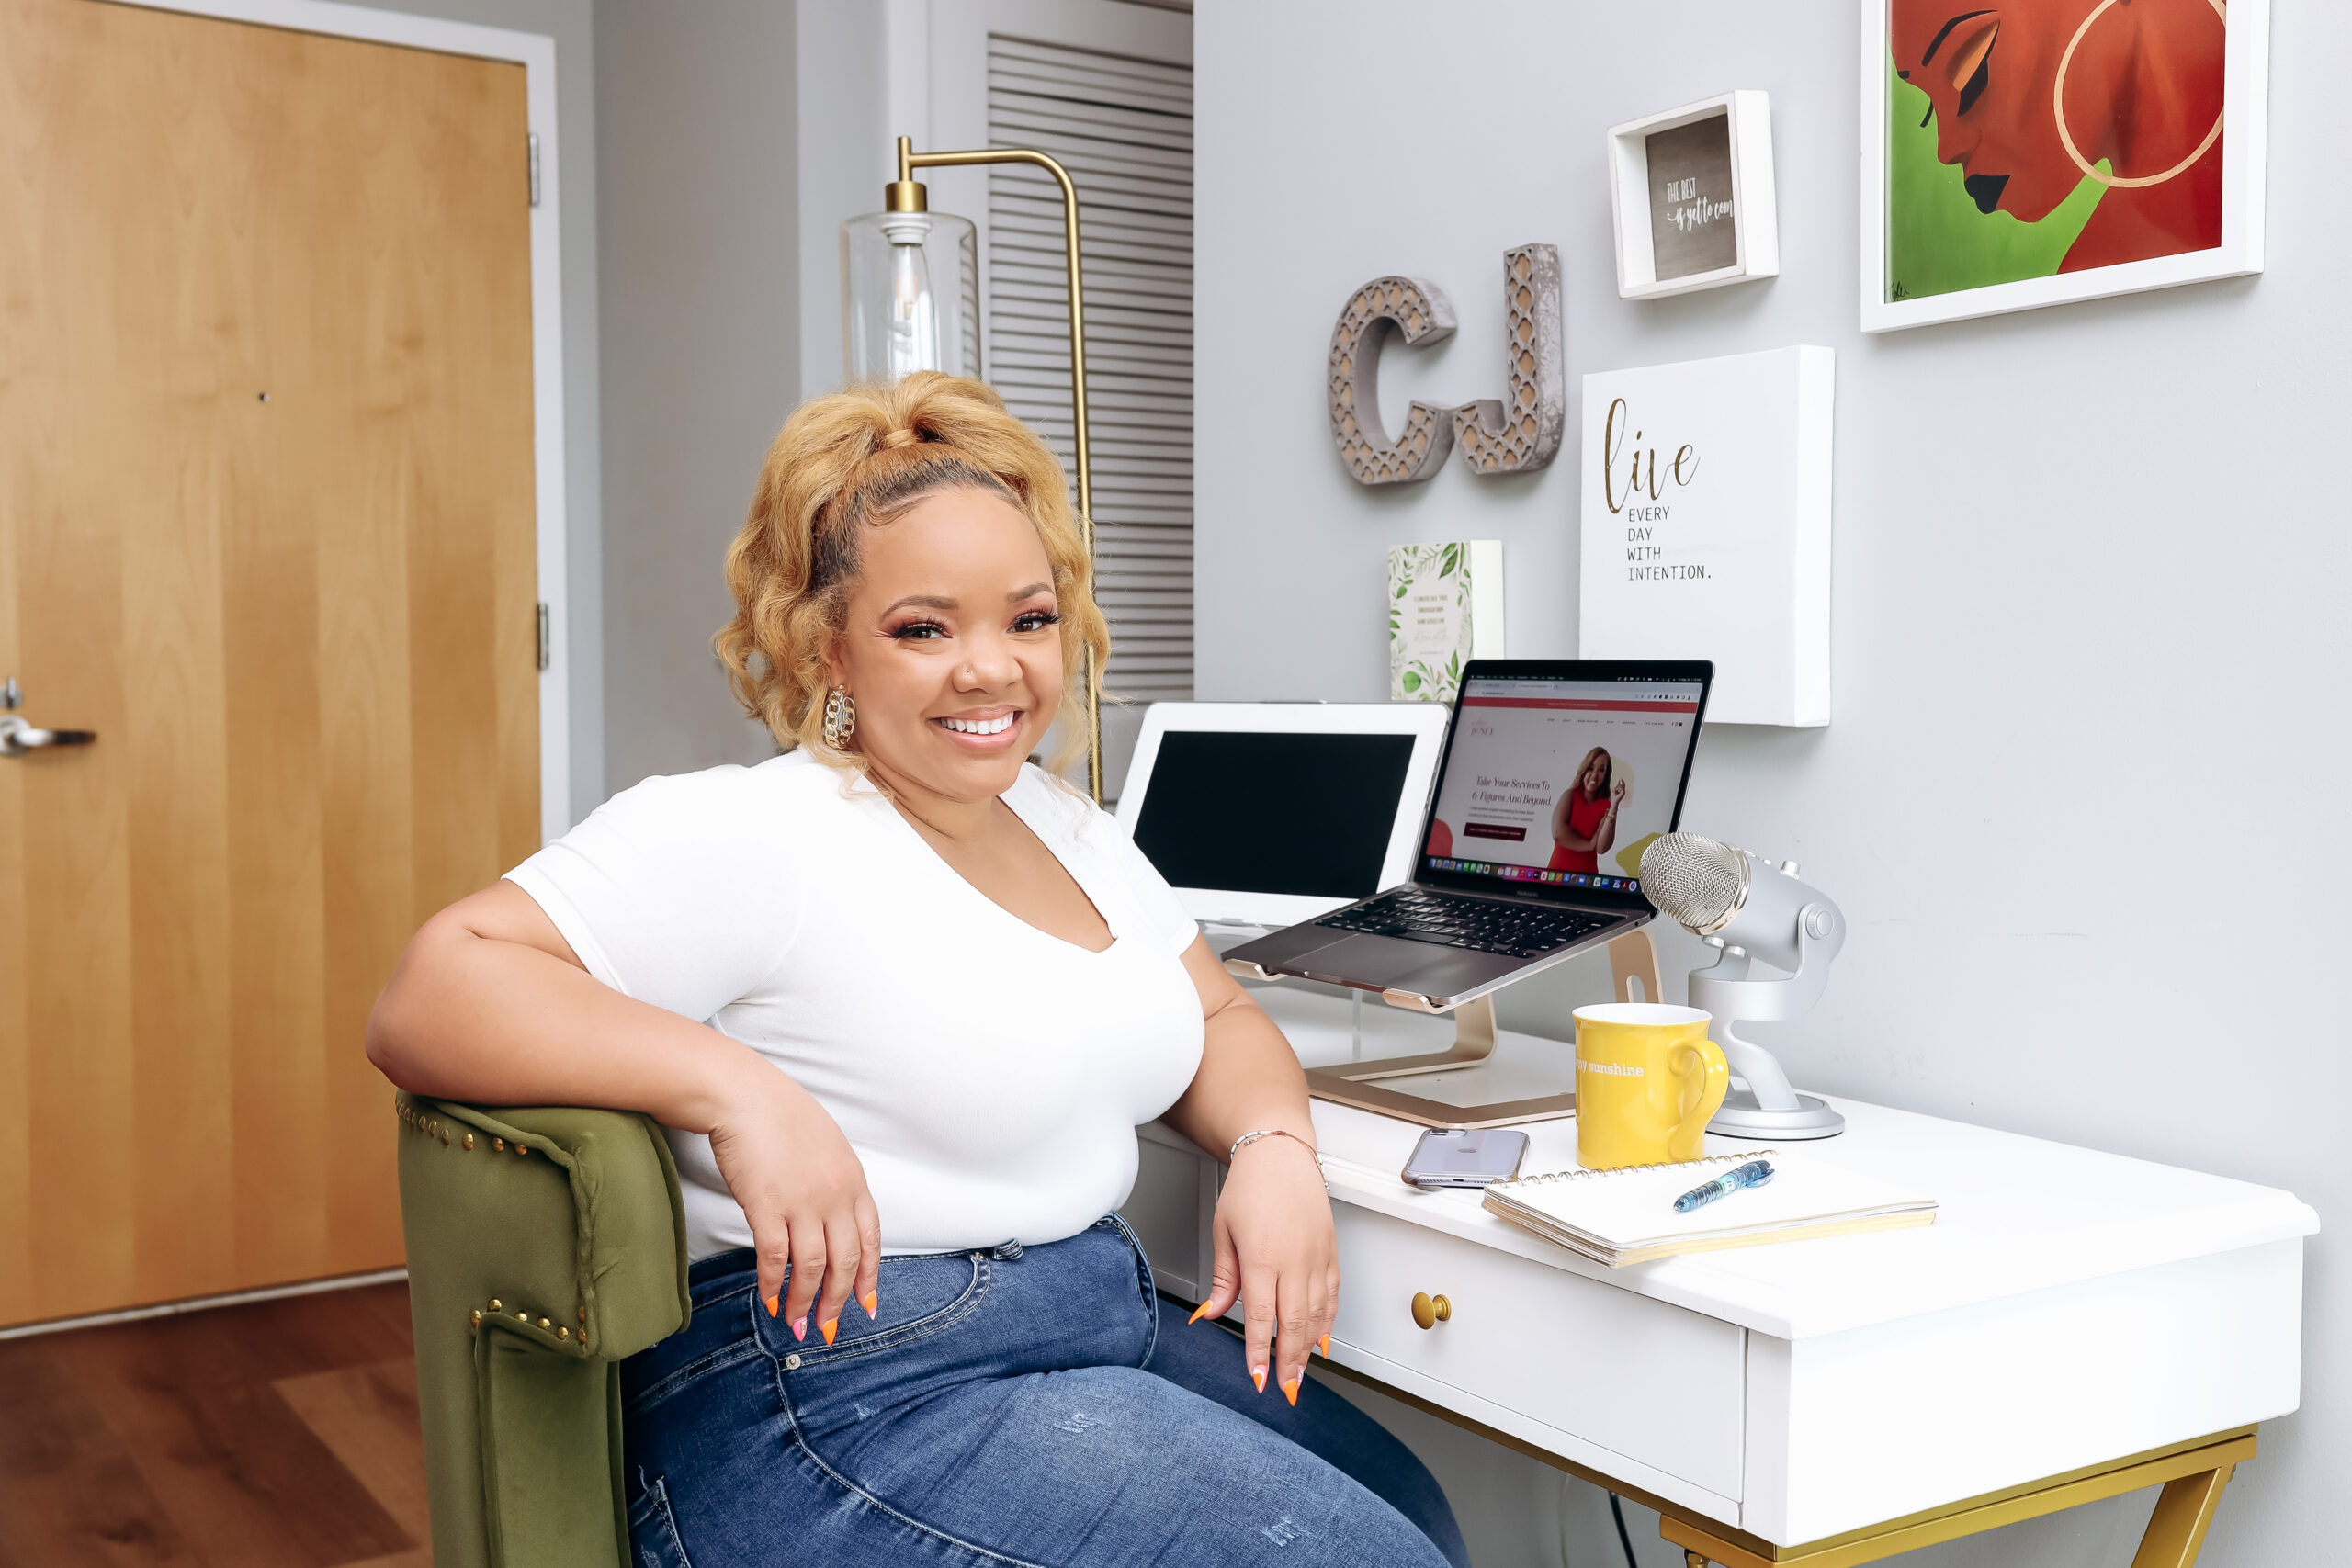 Black woman with blonde hair sitting in front of a desk workspace